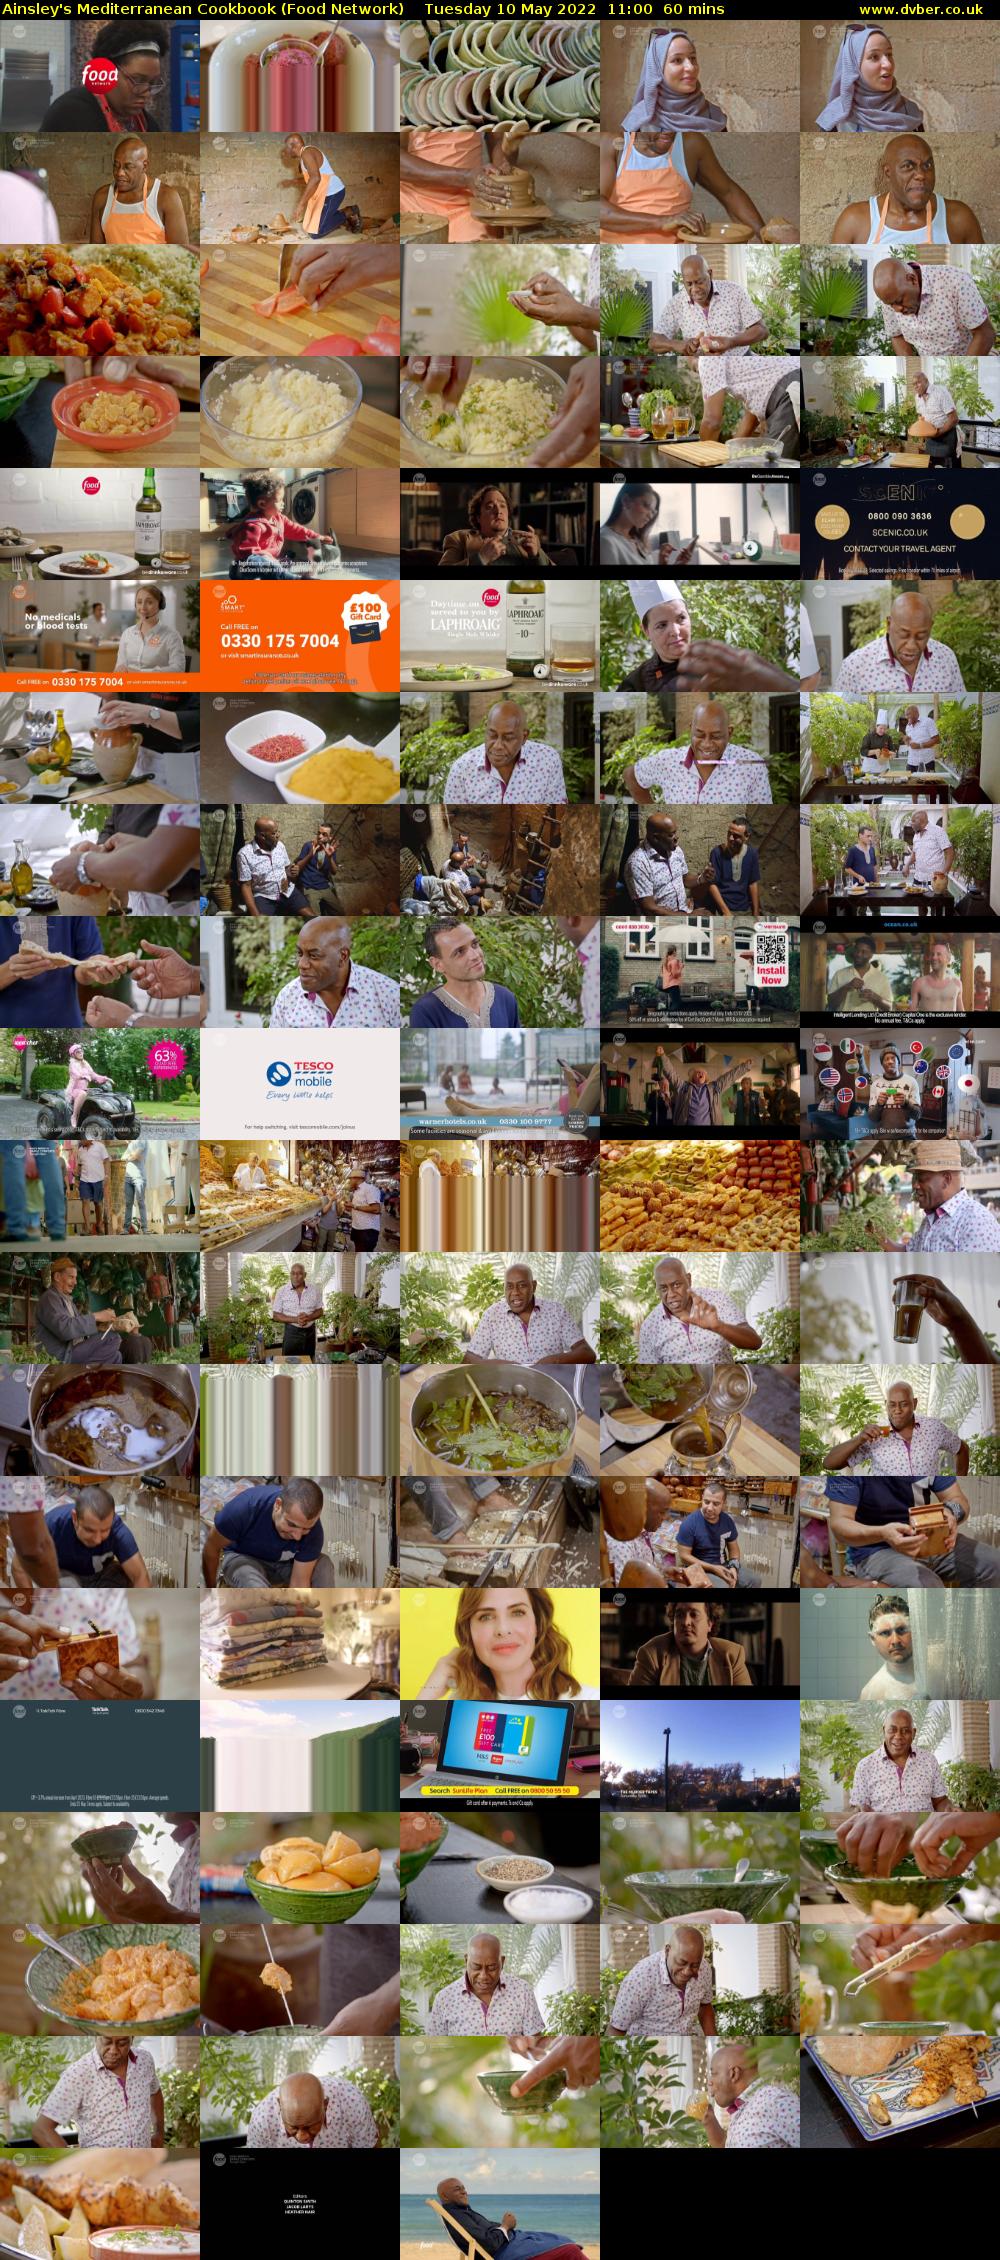 Ainsley's Mediterranean Cookbook (Food Network) Tuesday 10 May 2022 11:00 - 12:00